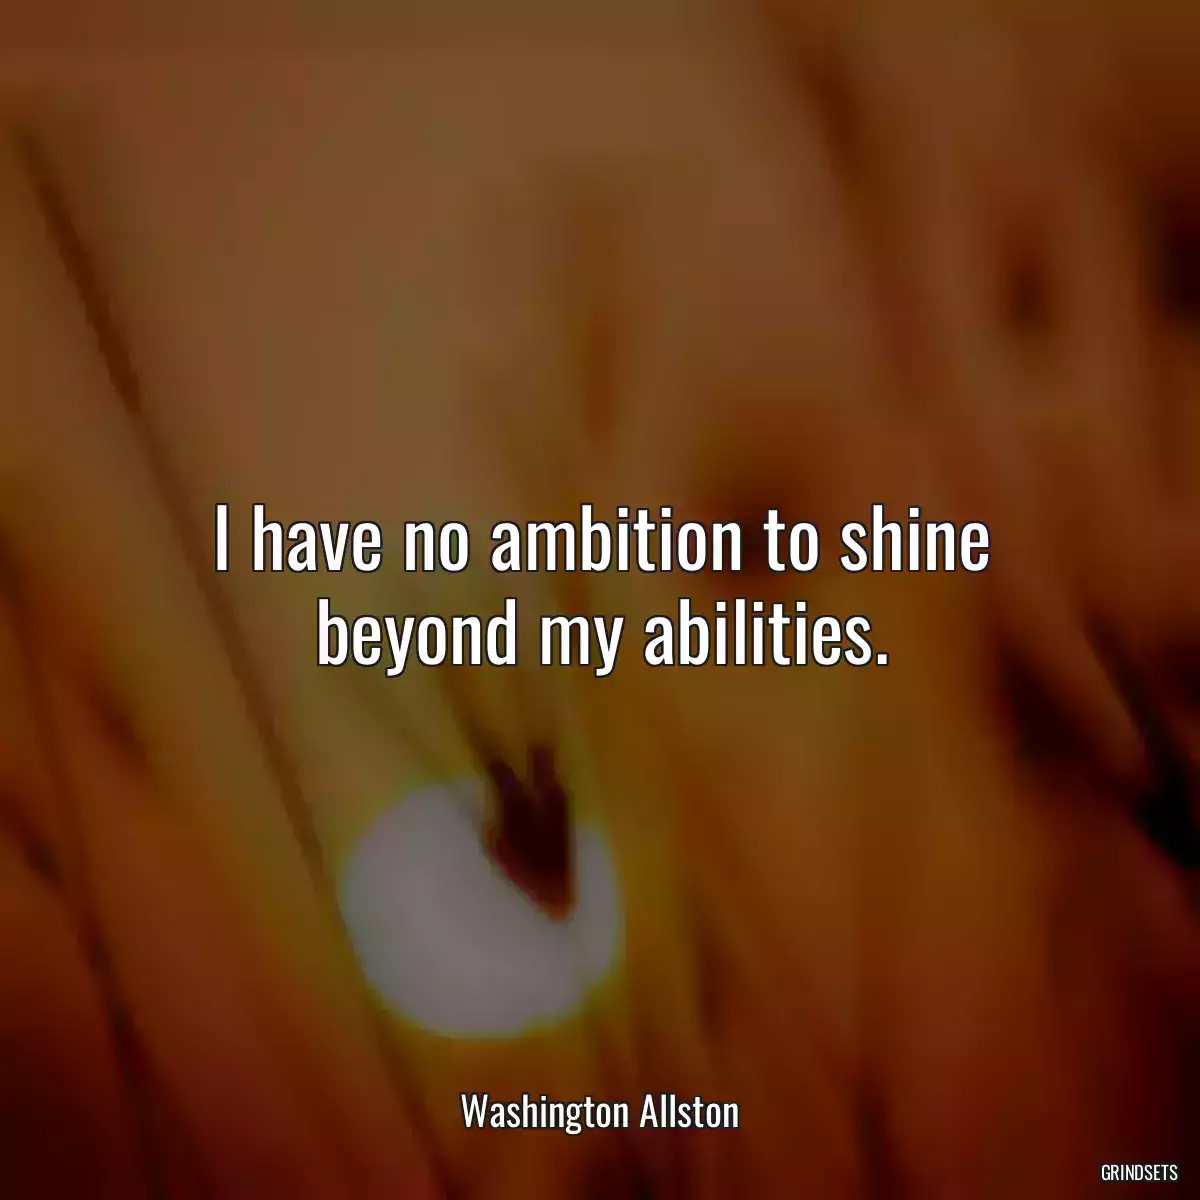 I have no ambition to shine beyond my abilities.